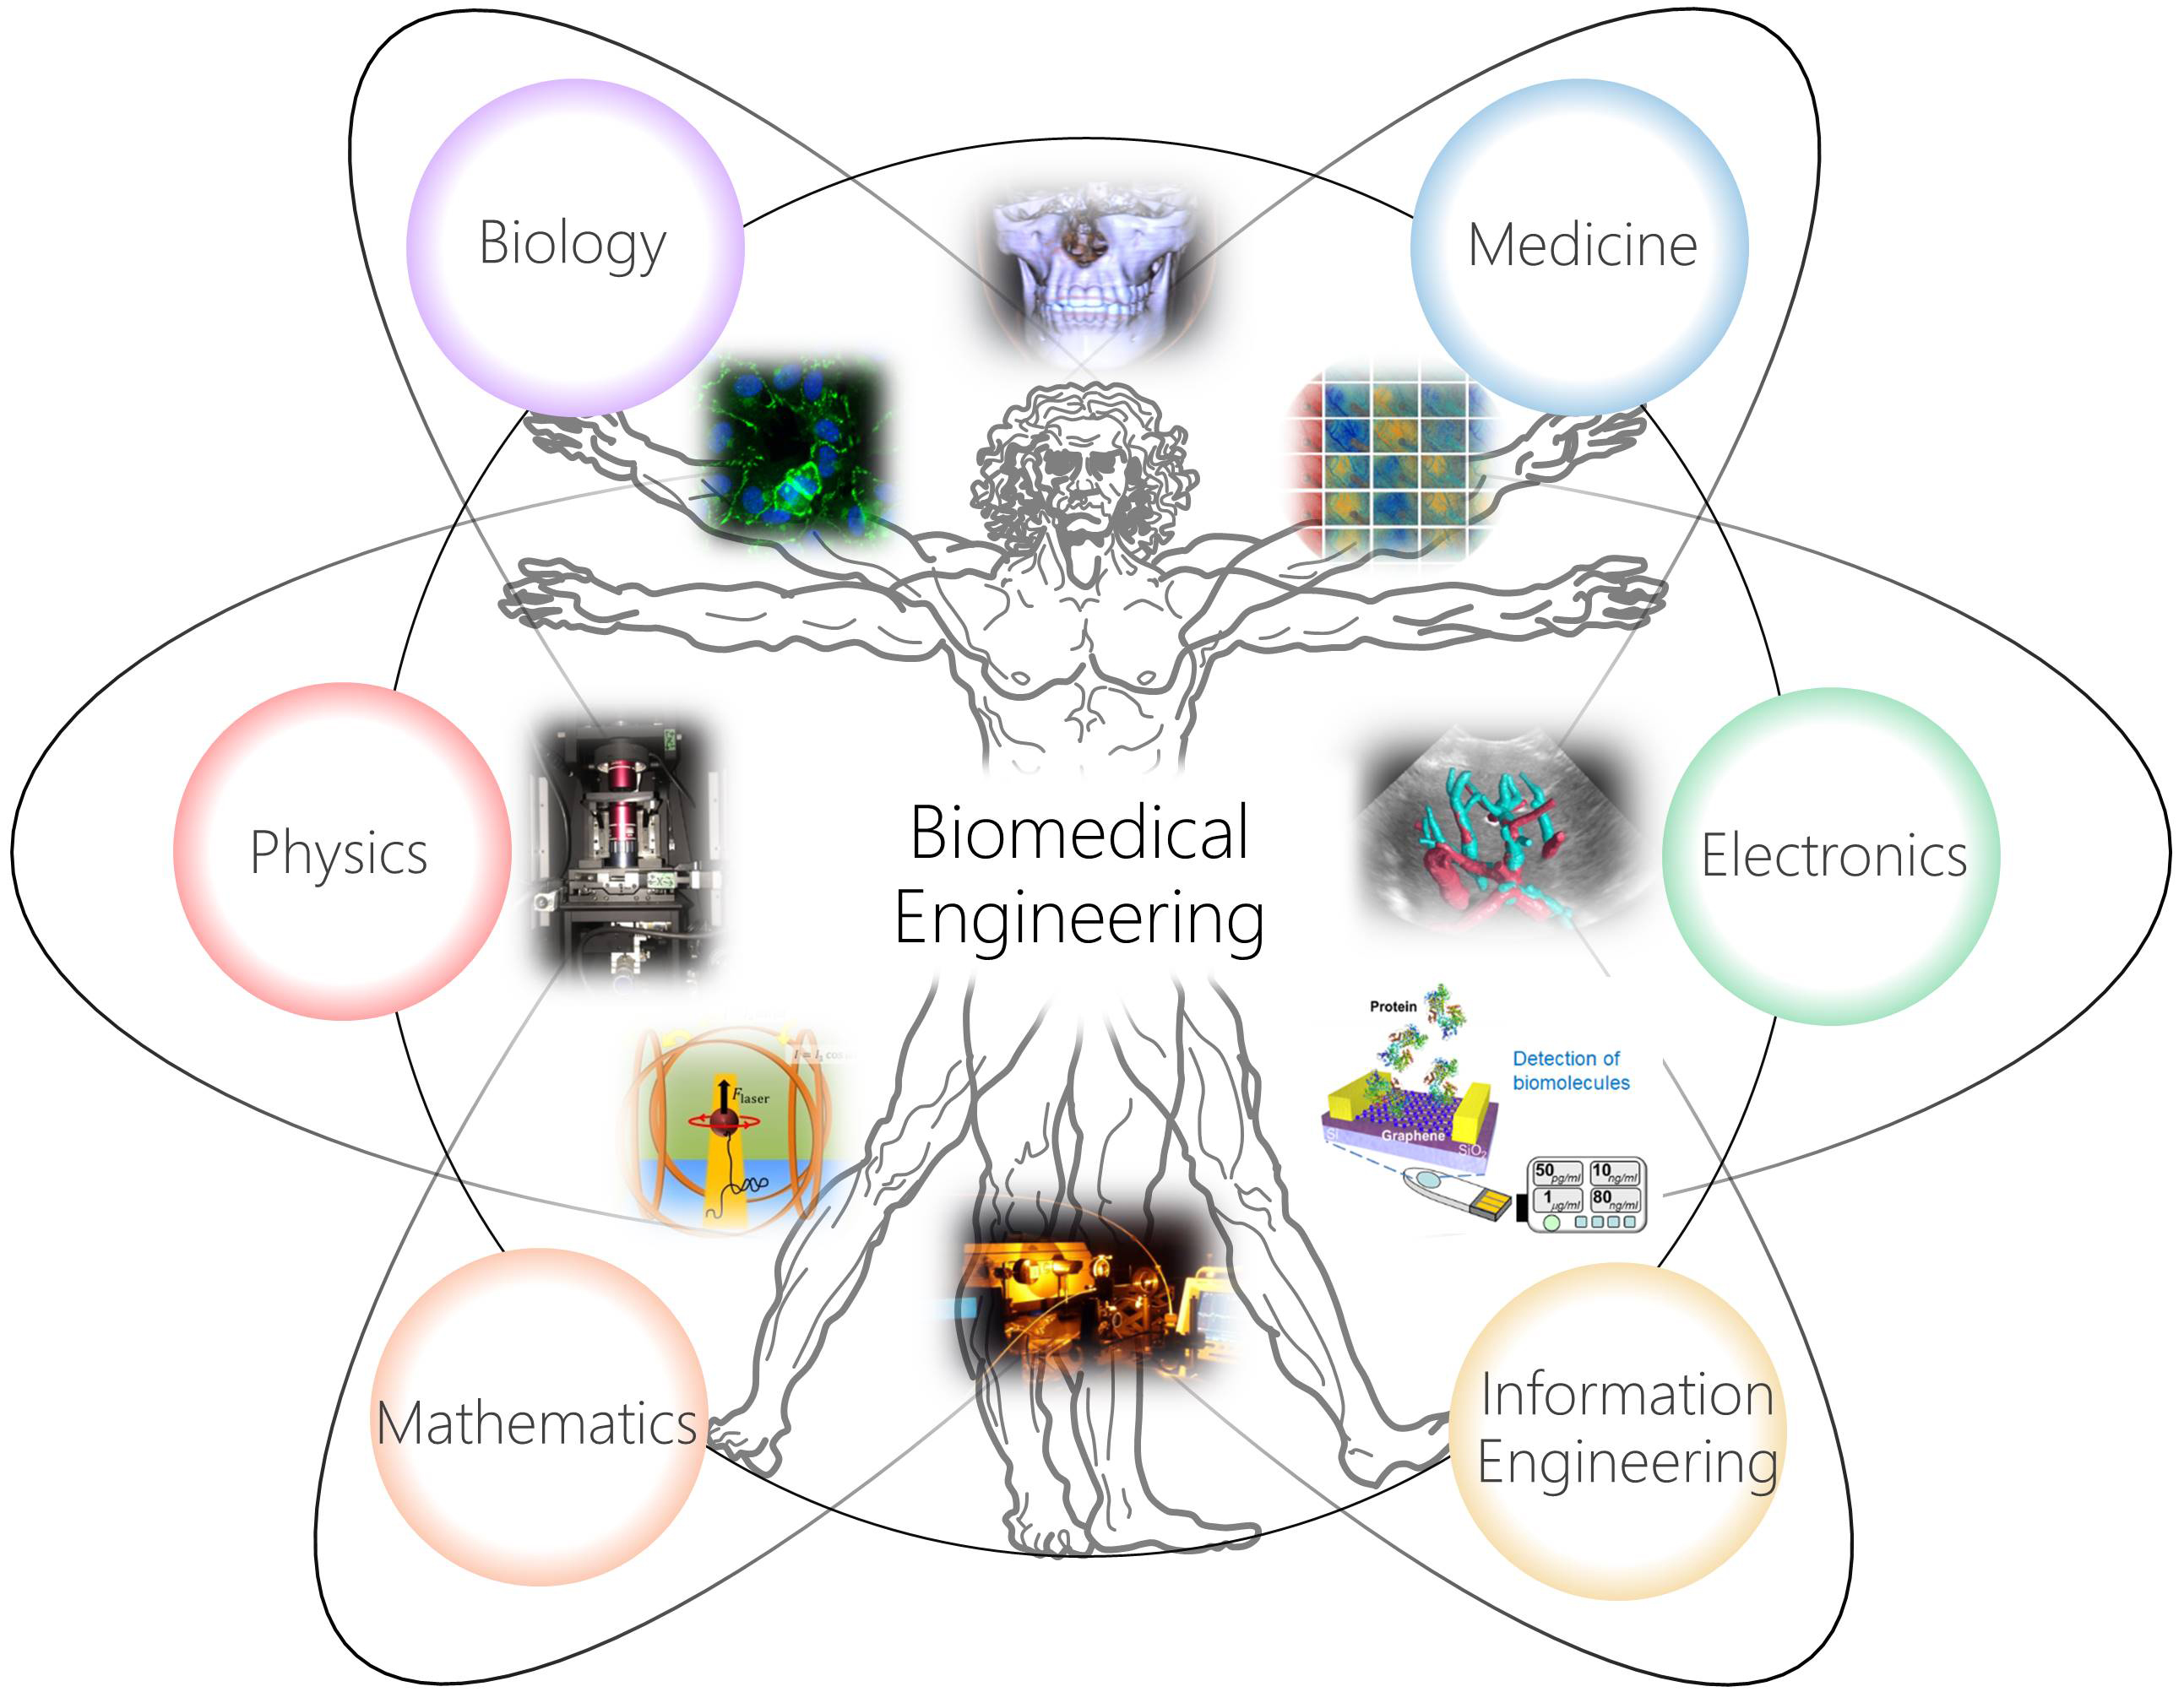 Characteristics of Learning in the Department of Biomedical Engineering